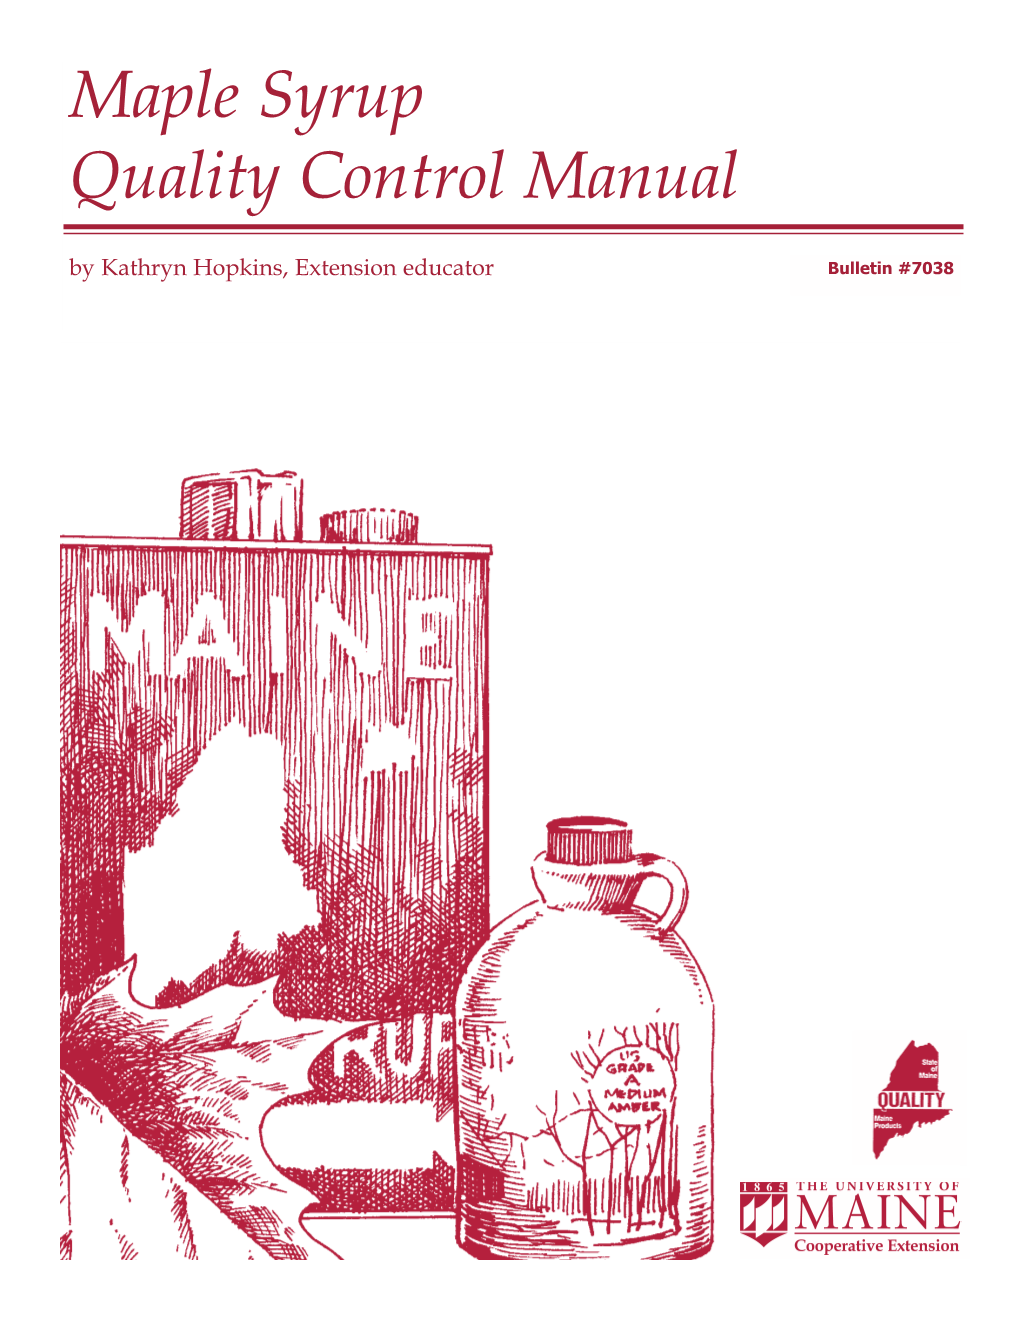 Bulletin #7038, Maple Syrup Quality Control Manual